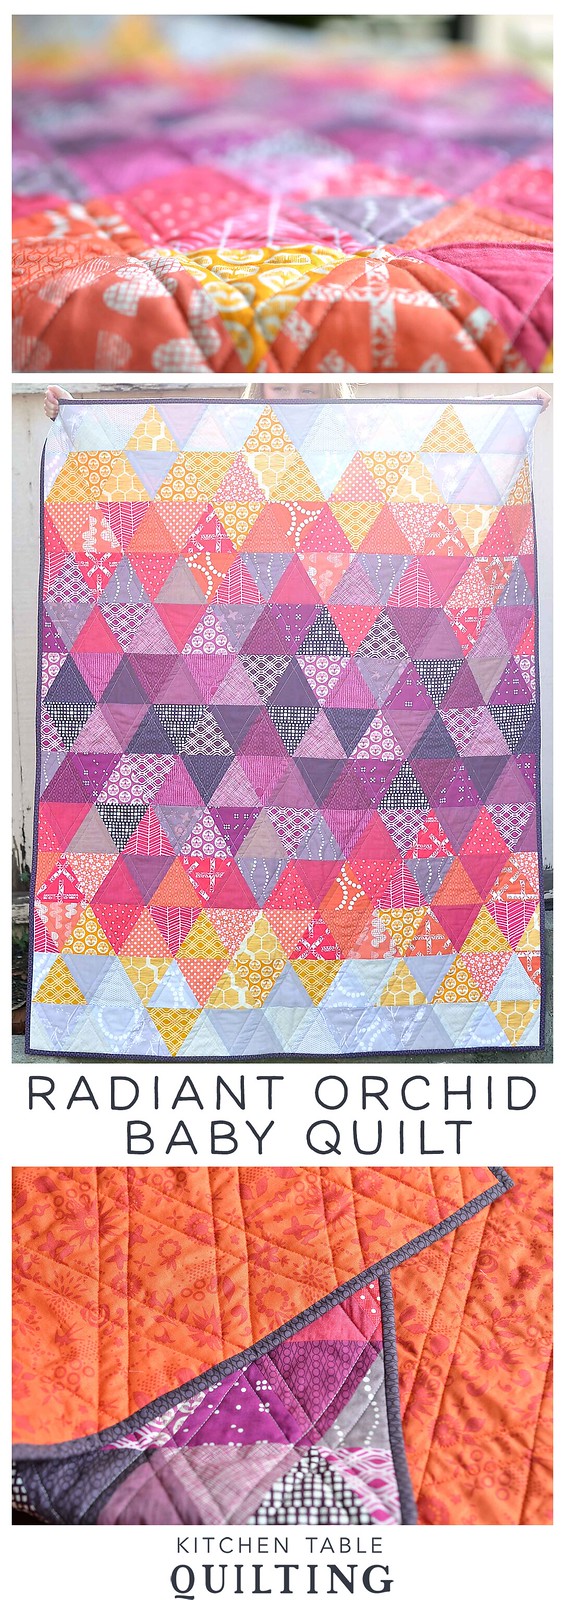 Radiant Orchid Baby Quilt - Kitchen Table Quilting